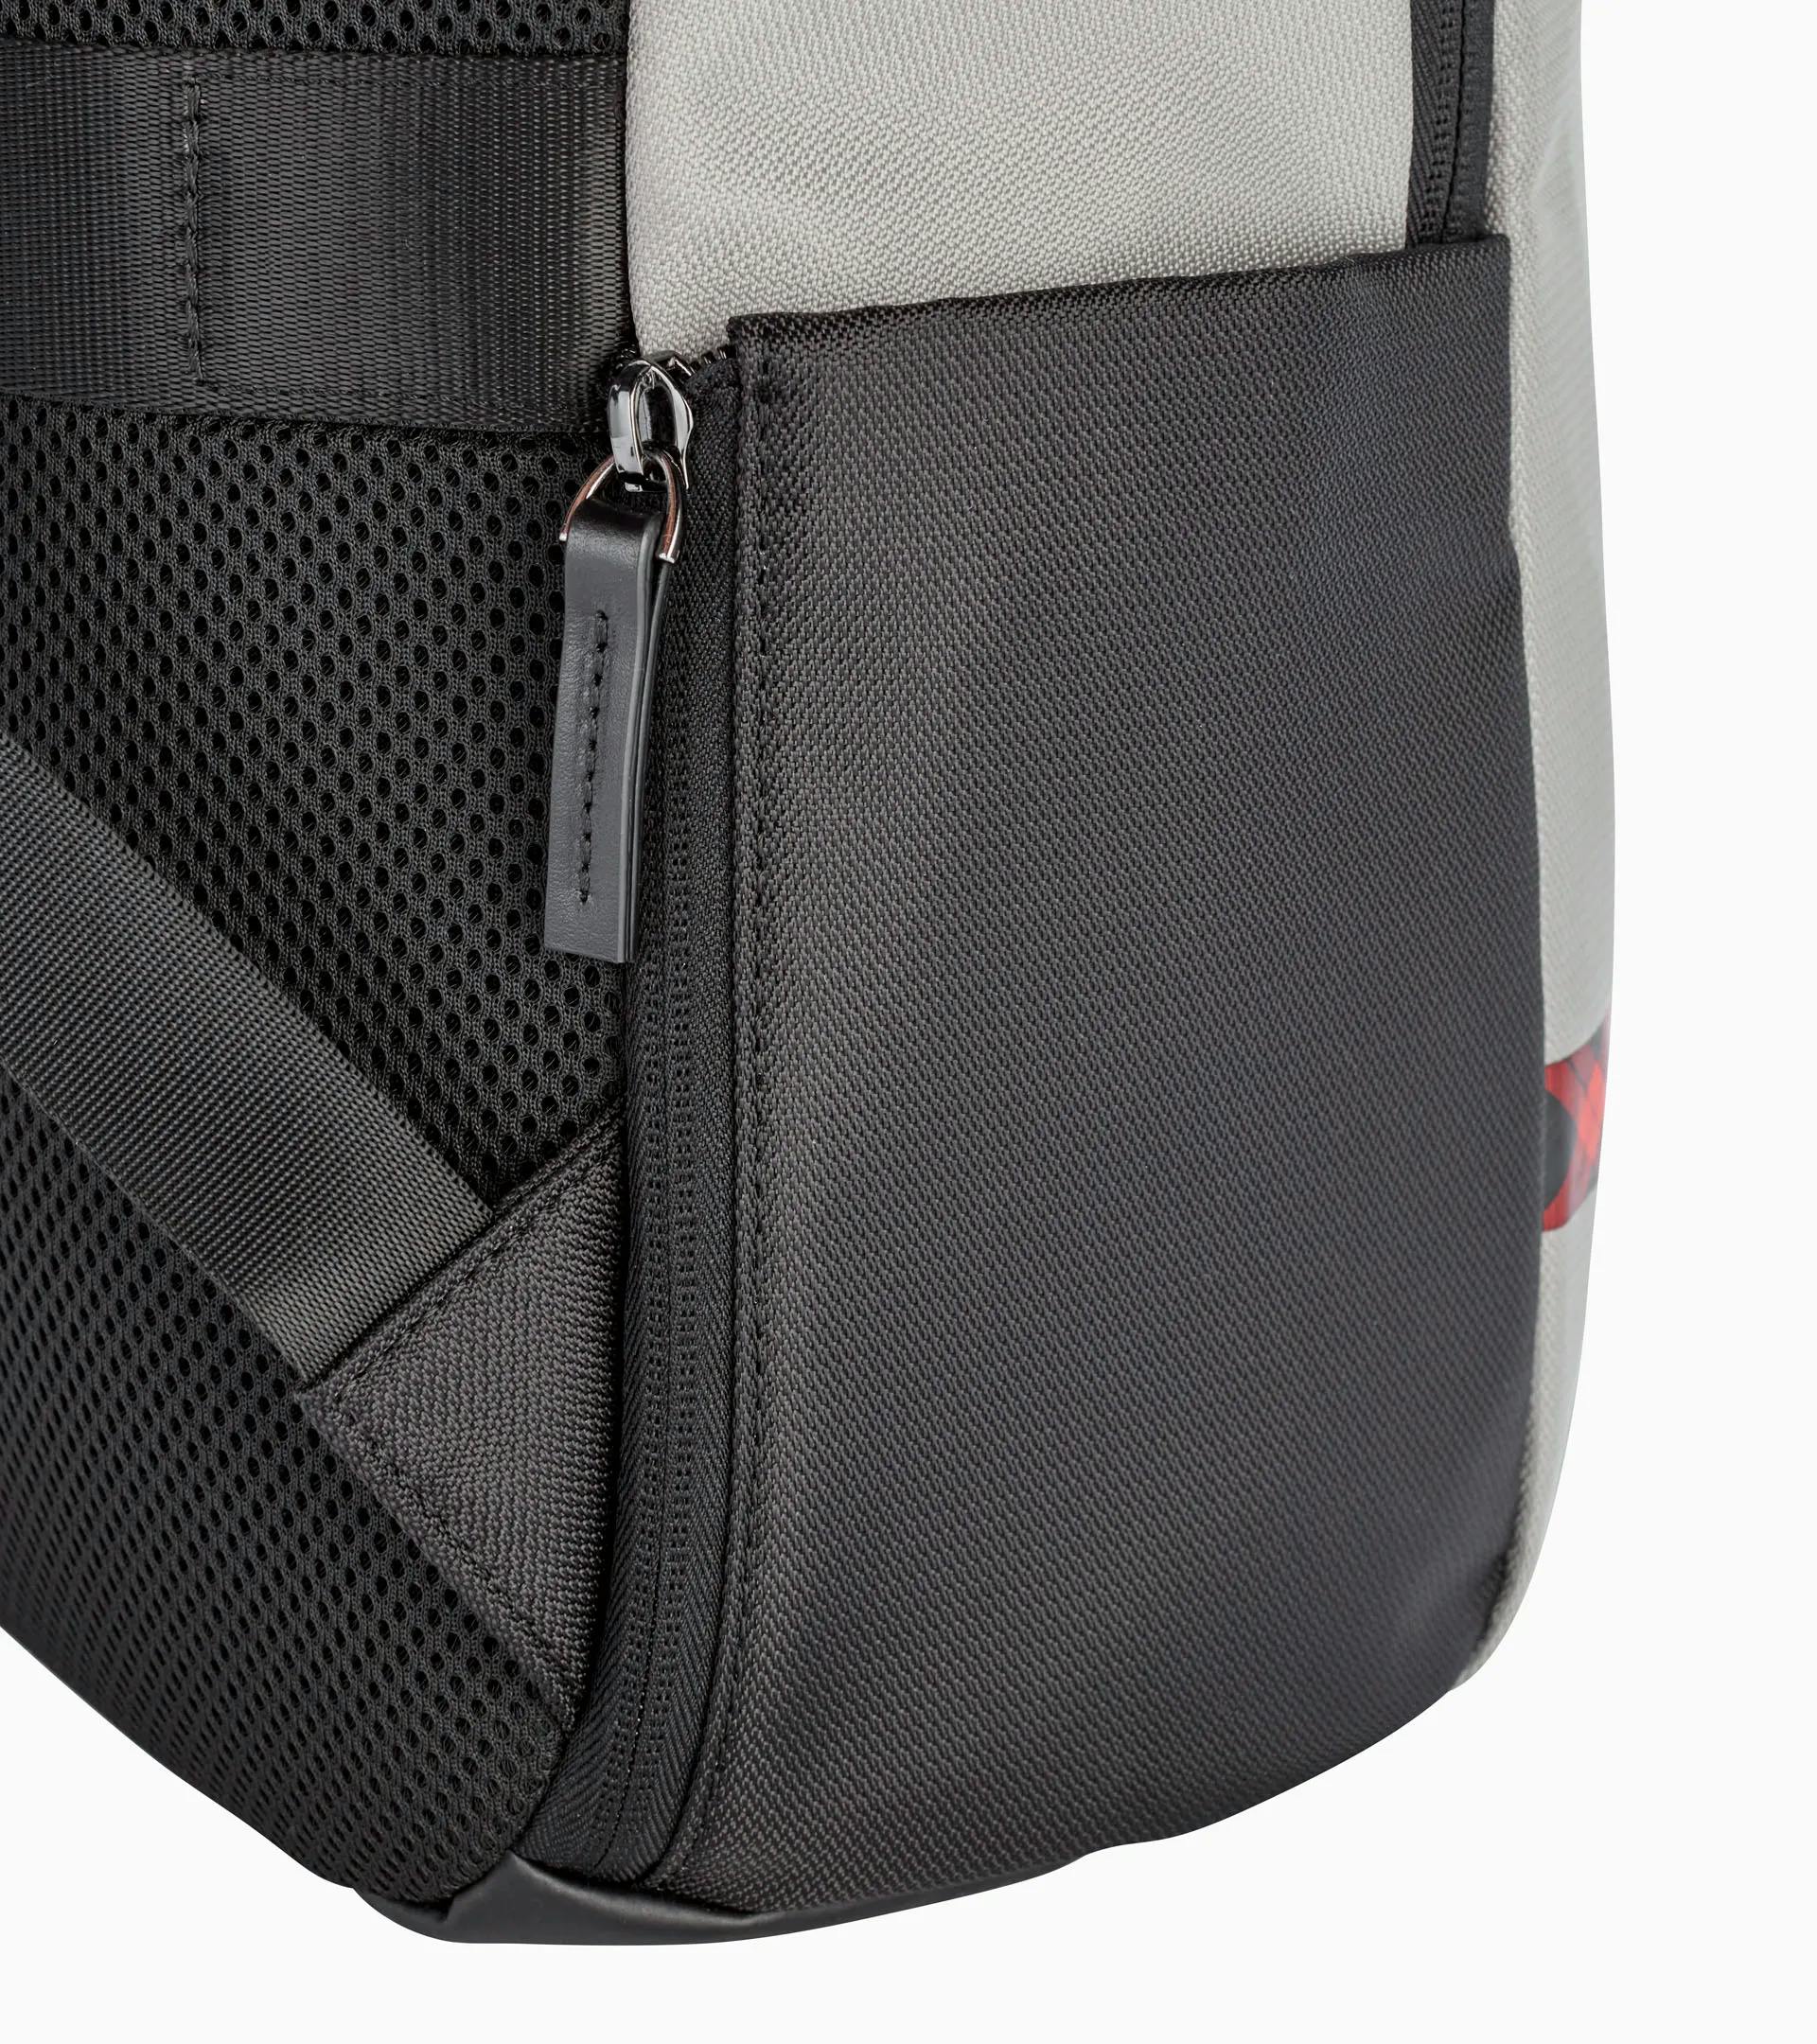 Backpack – Turbo No. 1 5